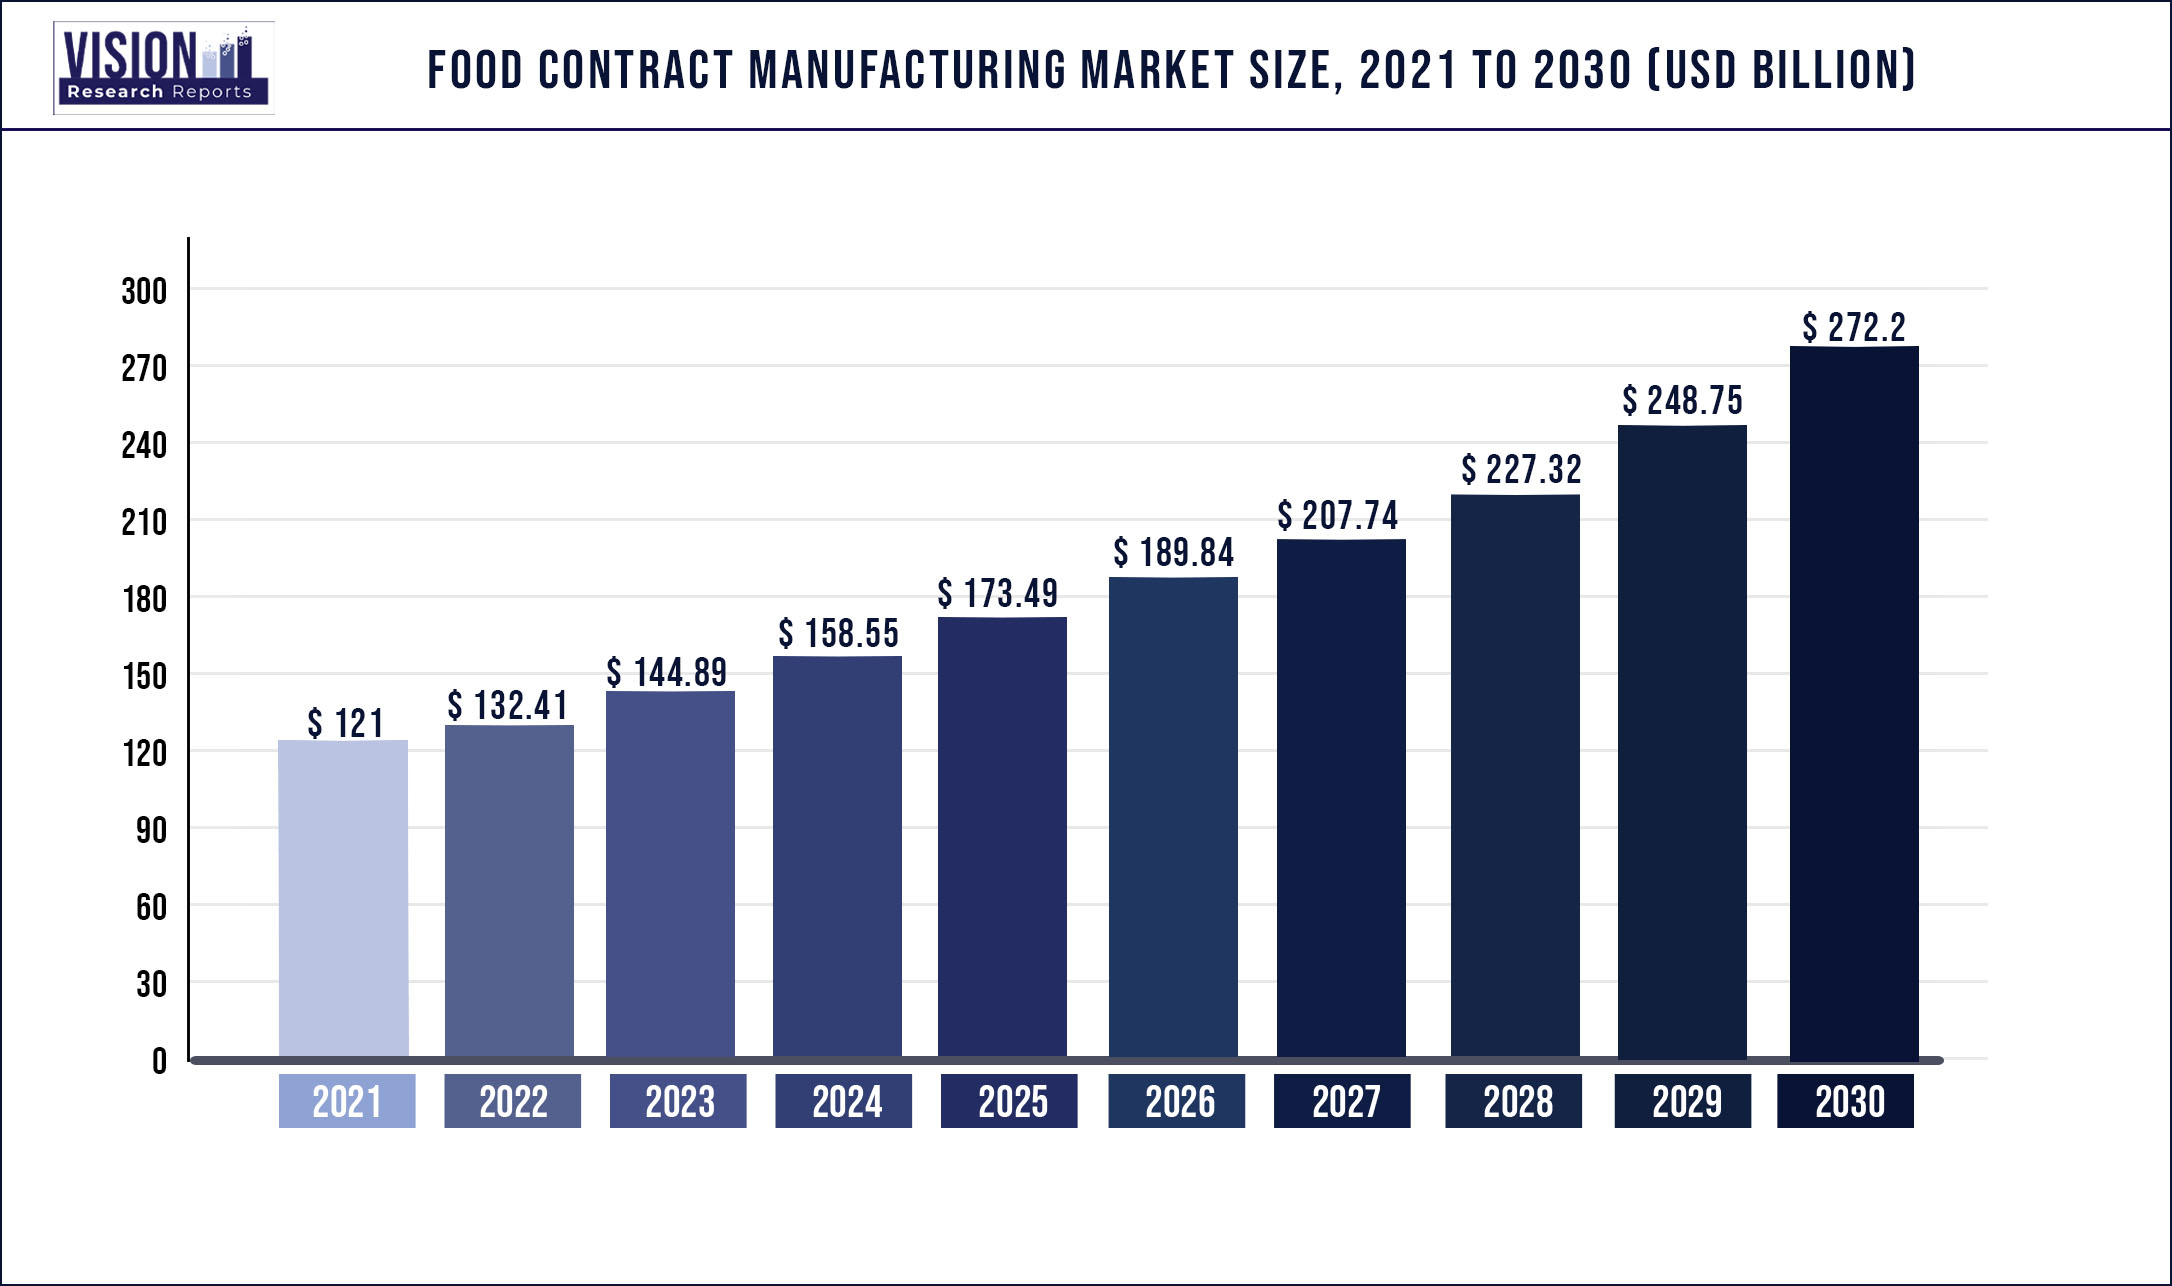 Food Contract Manufacturing Market Size 2021 to 2030